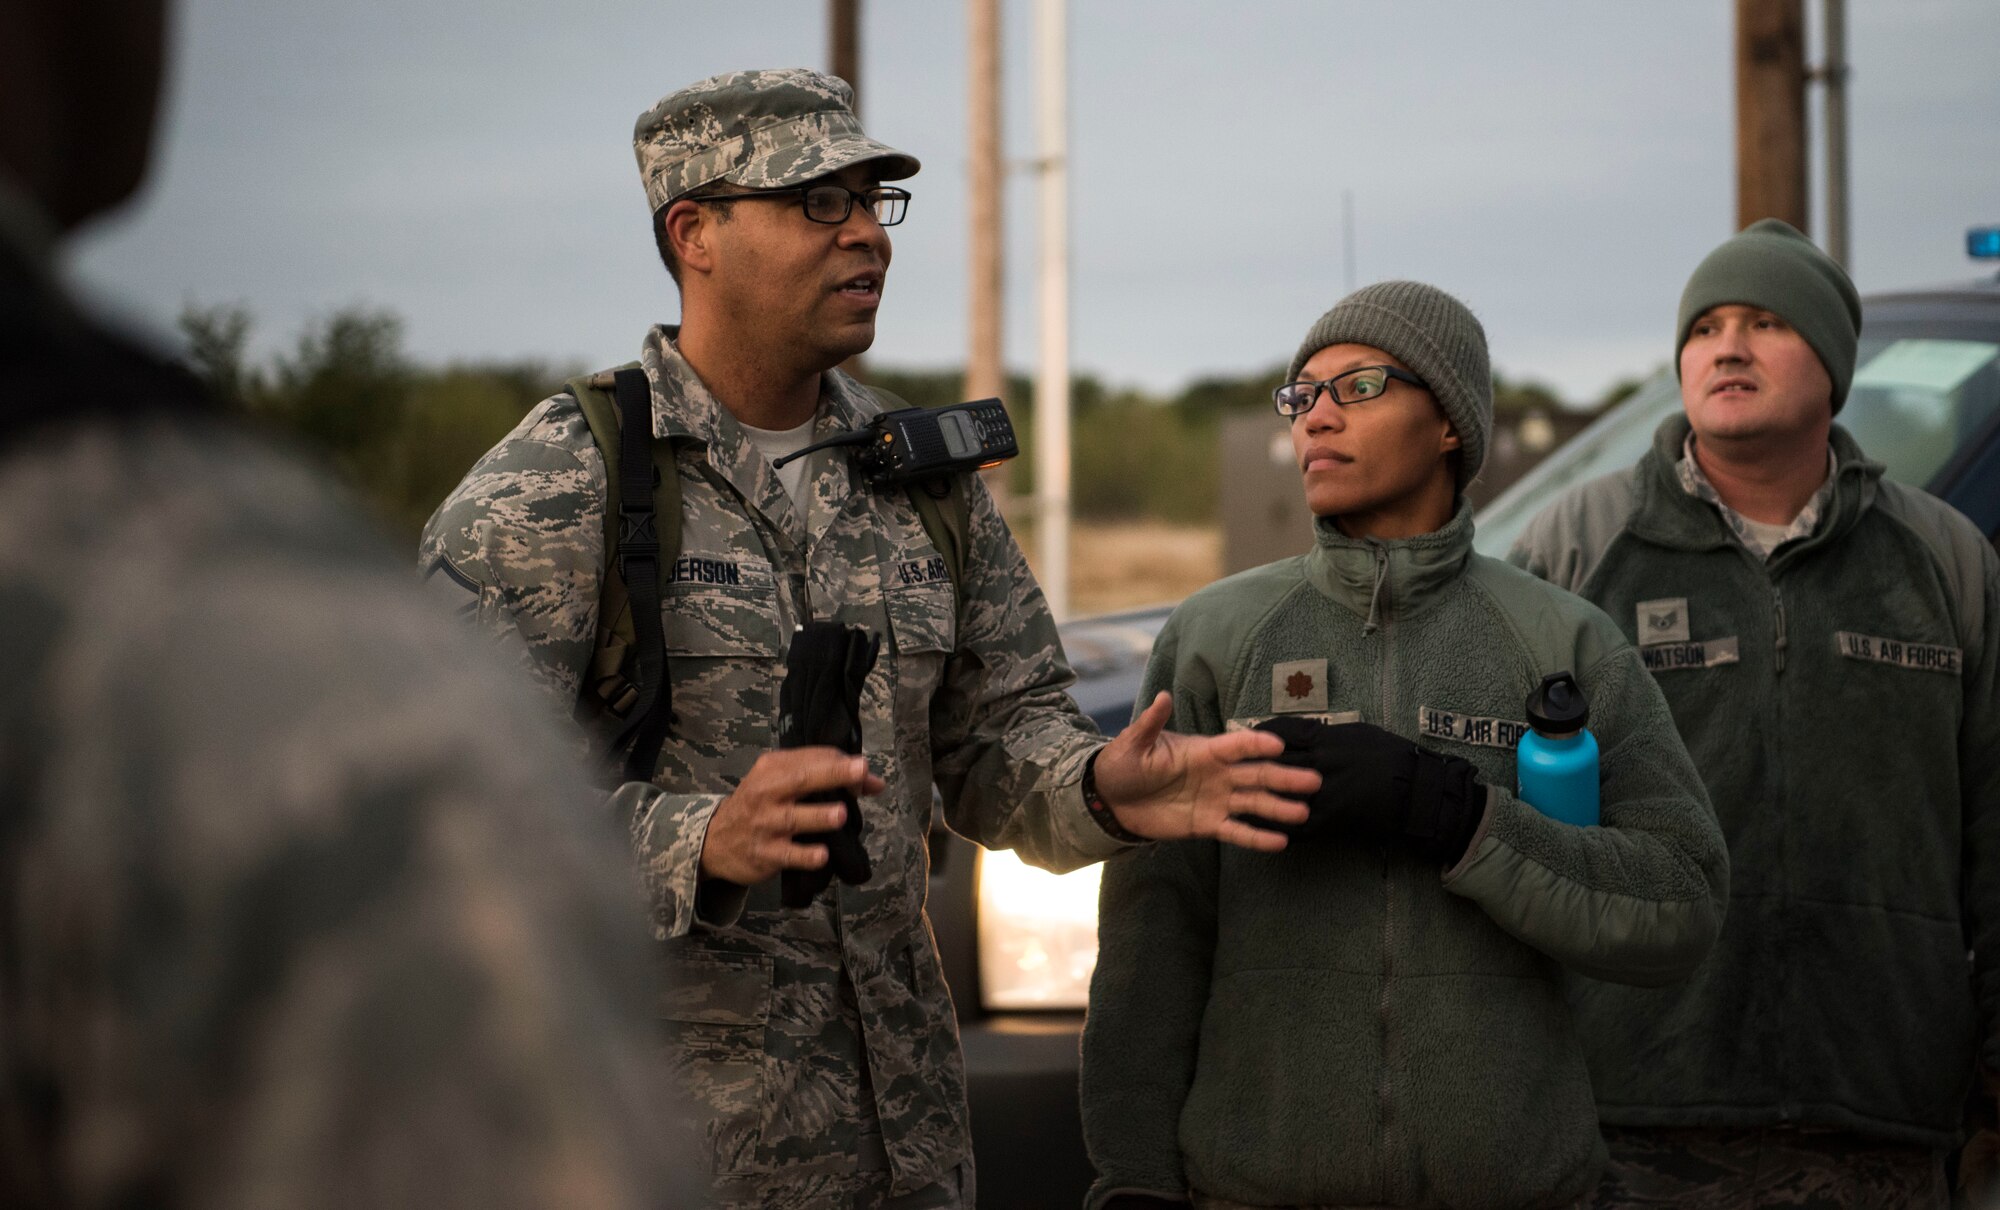 Master Sgt. Jason Anderson, 47th Operational Medical Readiness Squadron NCO in charge of flight medicine, gives feedback to the members of the 47th OMRS on how they performed during the readiness exercise at Laughlin Air Force Base, Texas, Oct. 25, 2019. The exercise was part of the new Defense Health Agency initiative to familiarize in-service medics with combat-like scenarios in order for them to be deployment-ready. (U.S. Air Force photo by Senior Airman Marco A. Gomez)